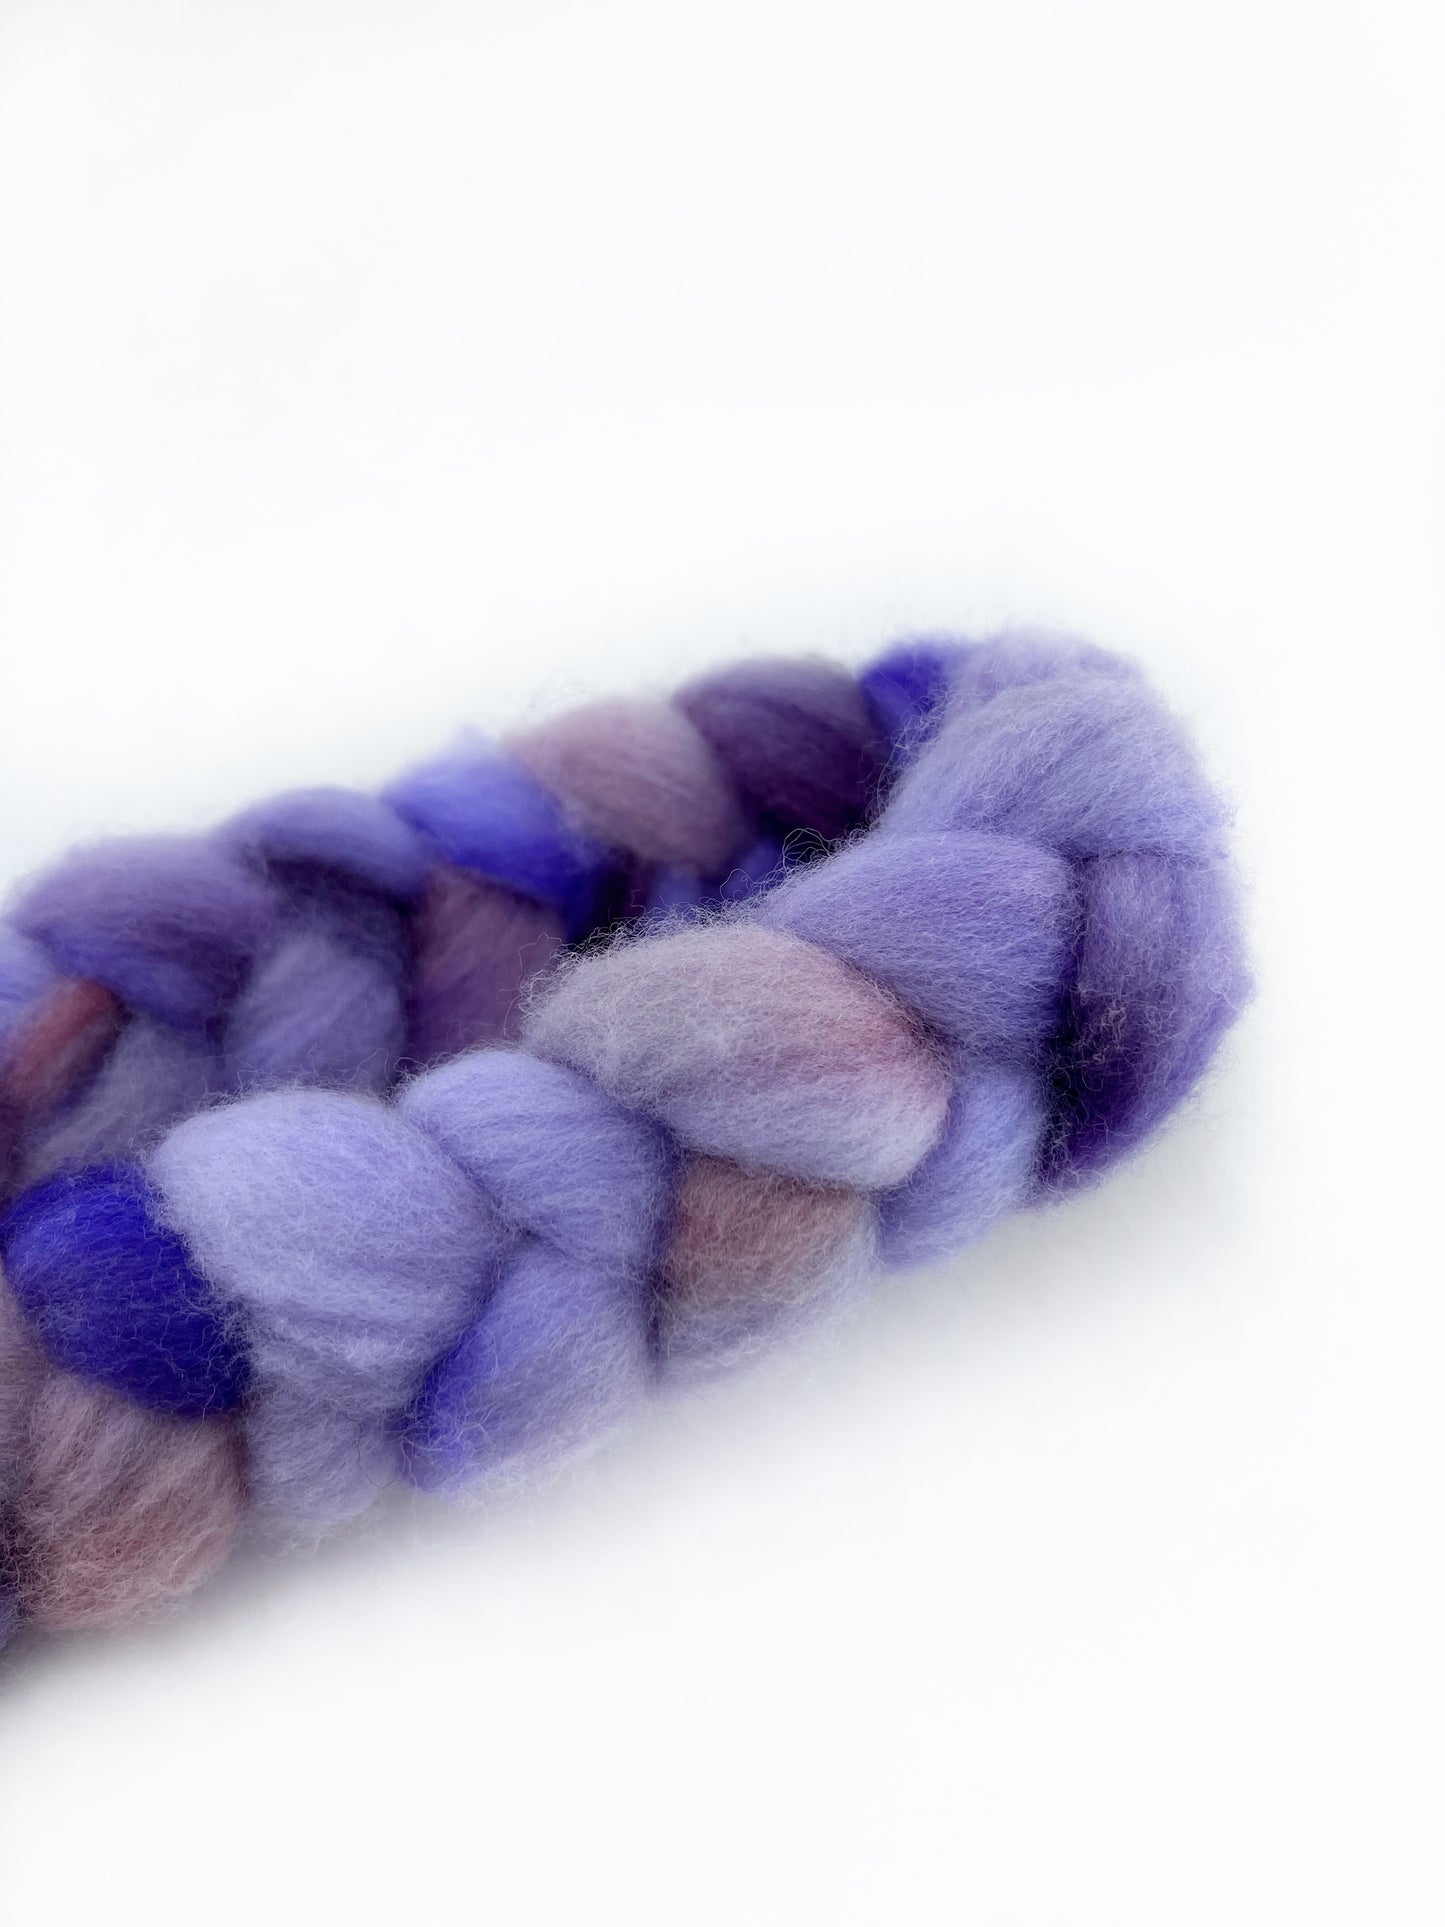 SNACK SIZE PURPLE Hand Dyed Spinning Fibre Purples Polwarth Top Non Superwash